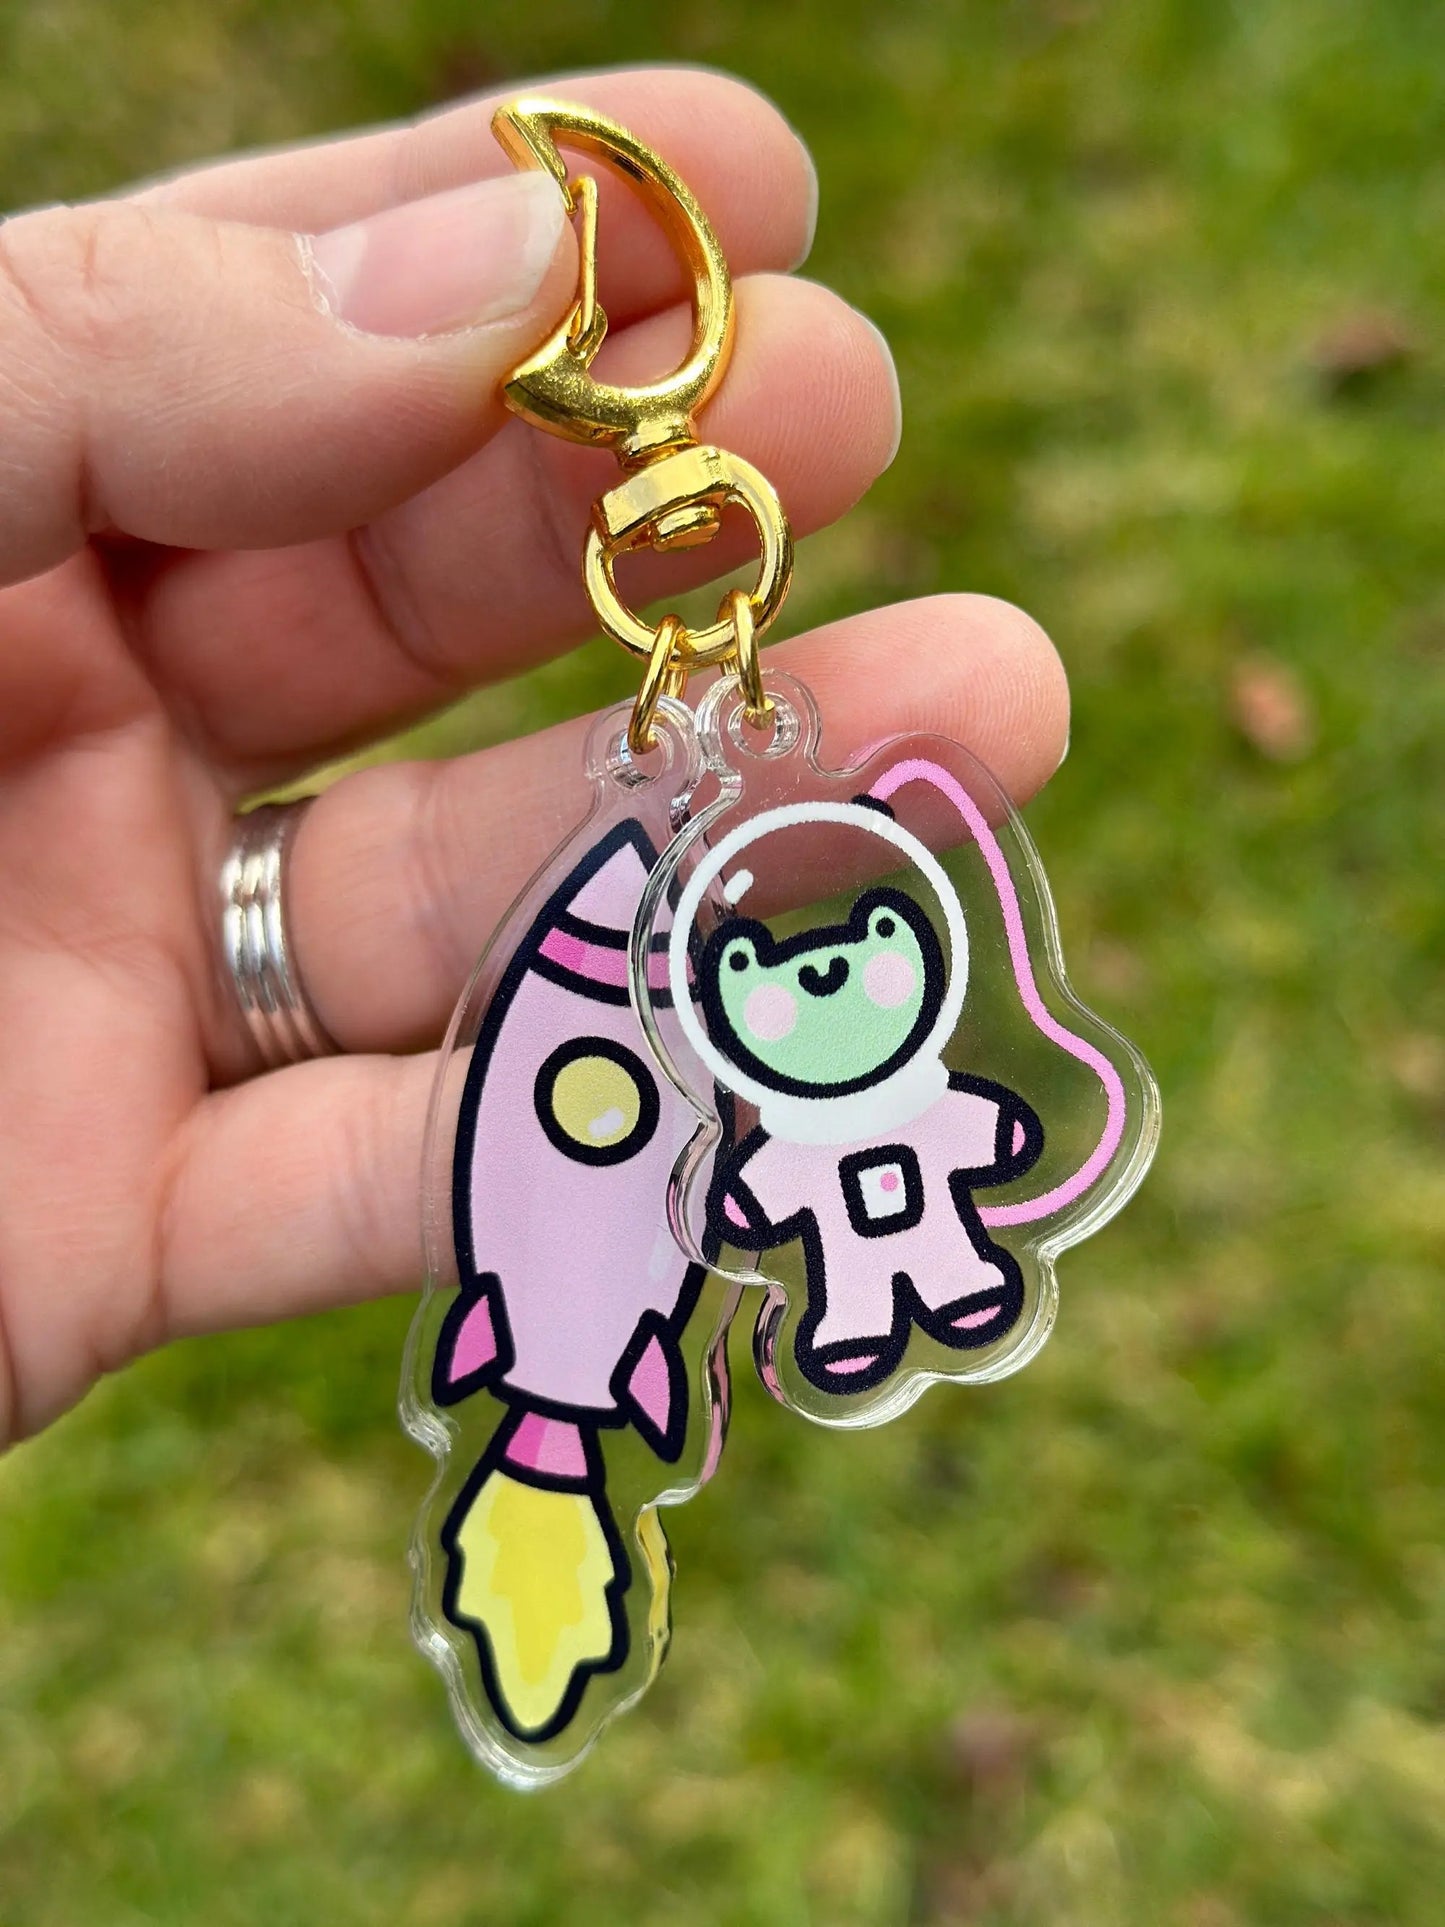 a person holding a keychain with a cartoon character on it